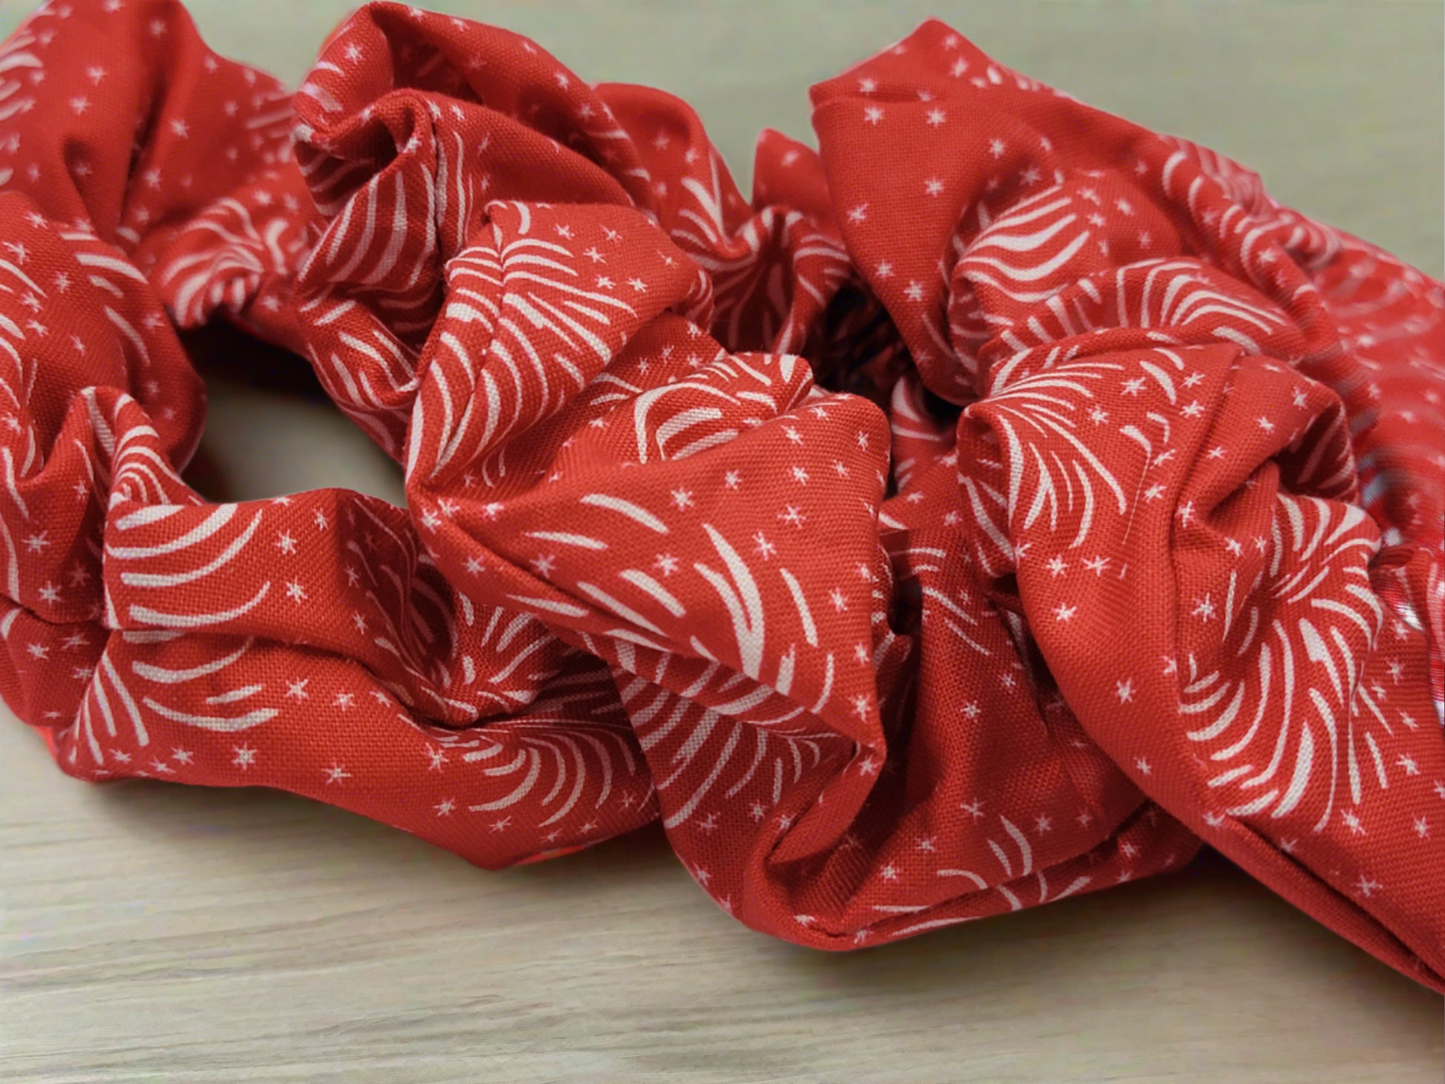 Americana Red Fireworks Cotton Scrunchies